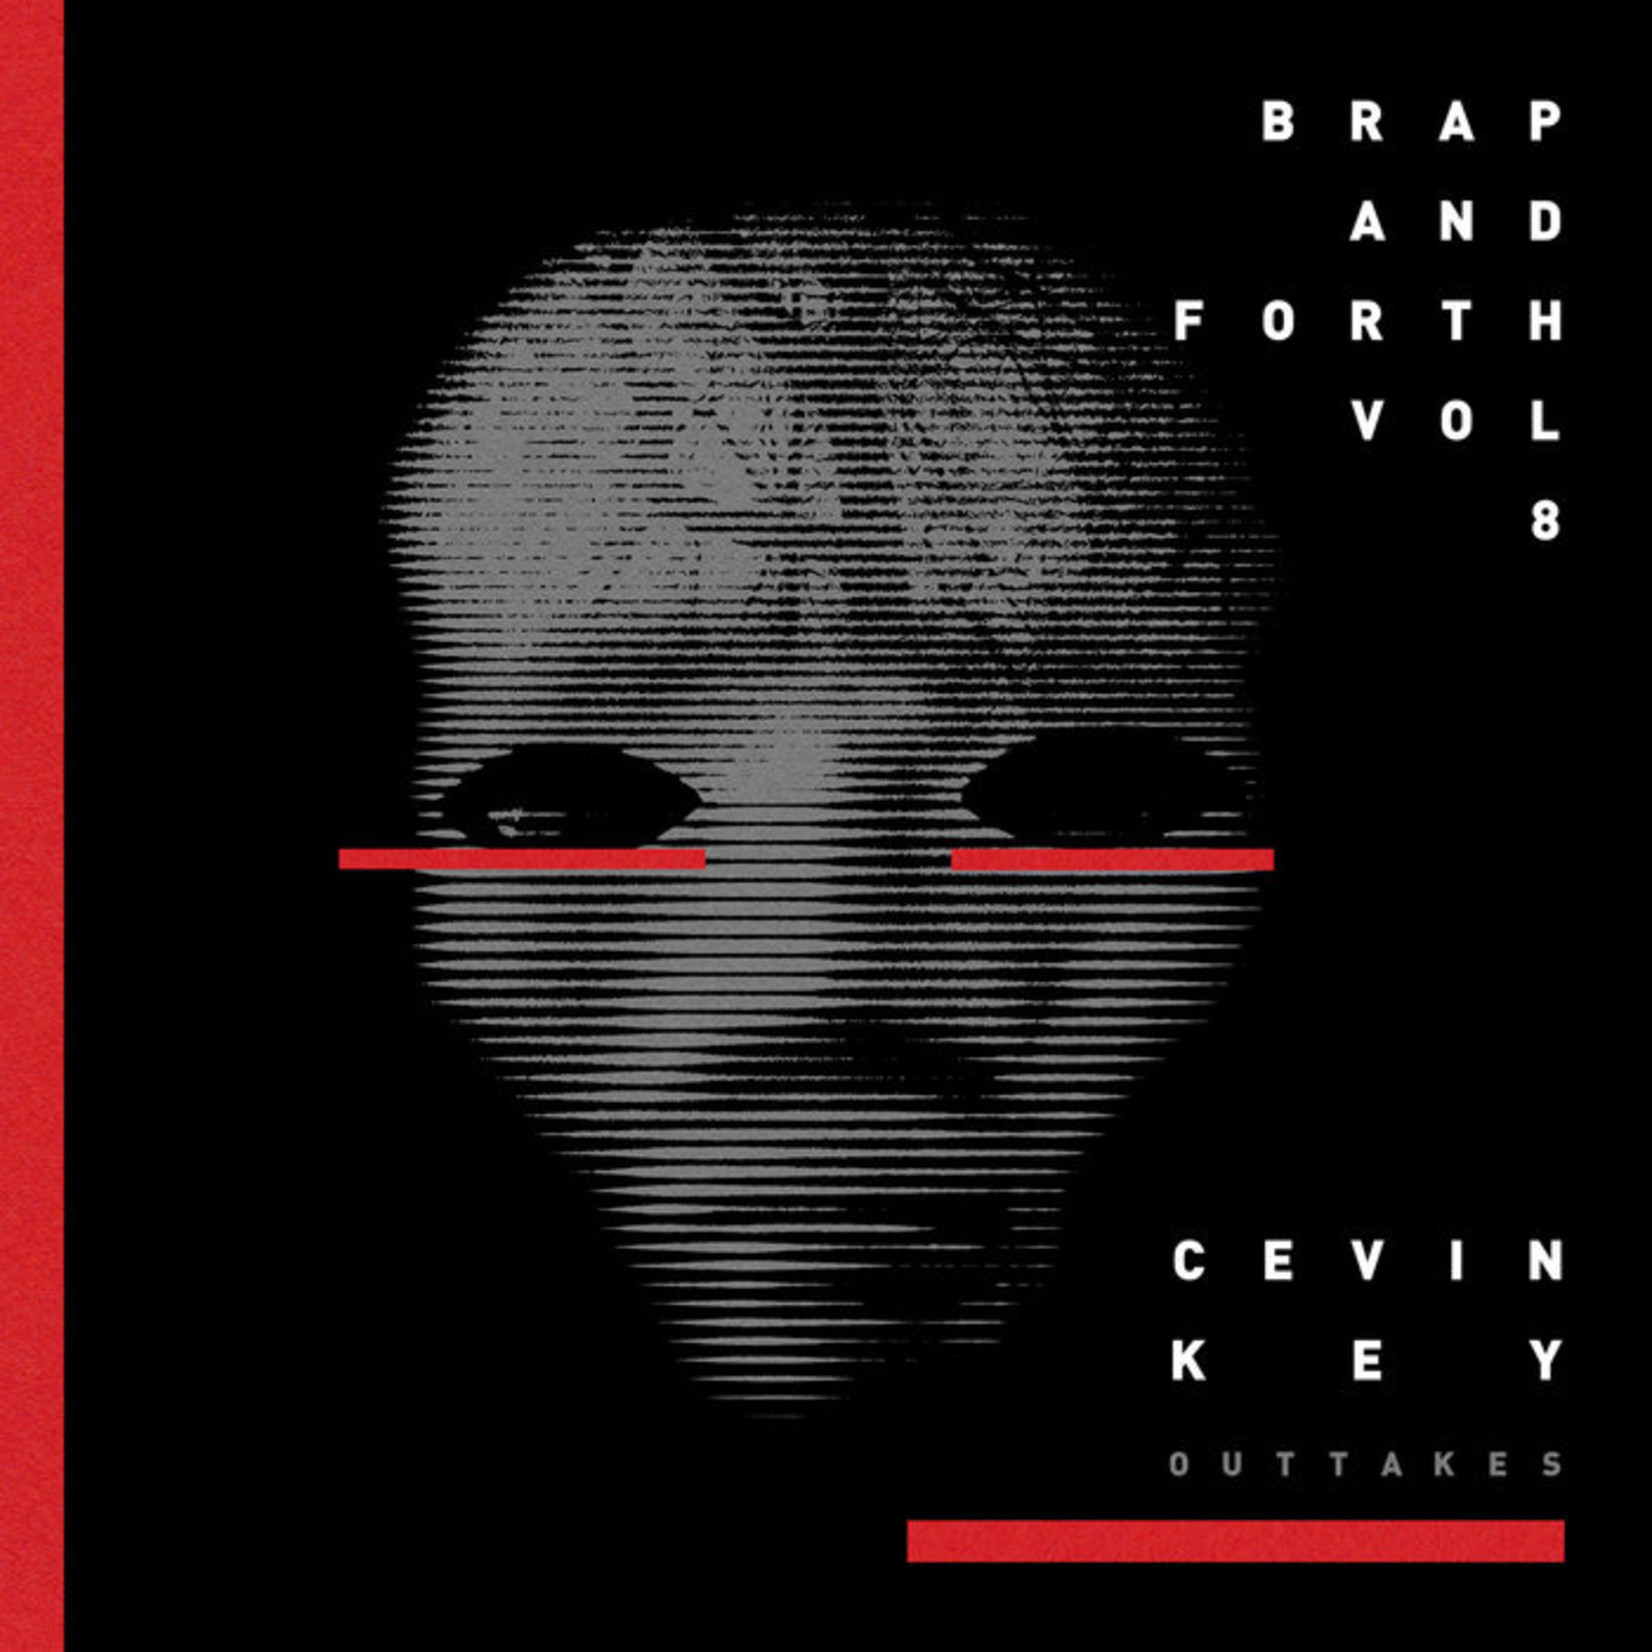 CEVIN KEY OUTTAKES - BRAP AND FORTH VOL 8